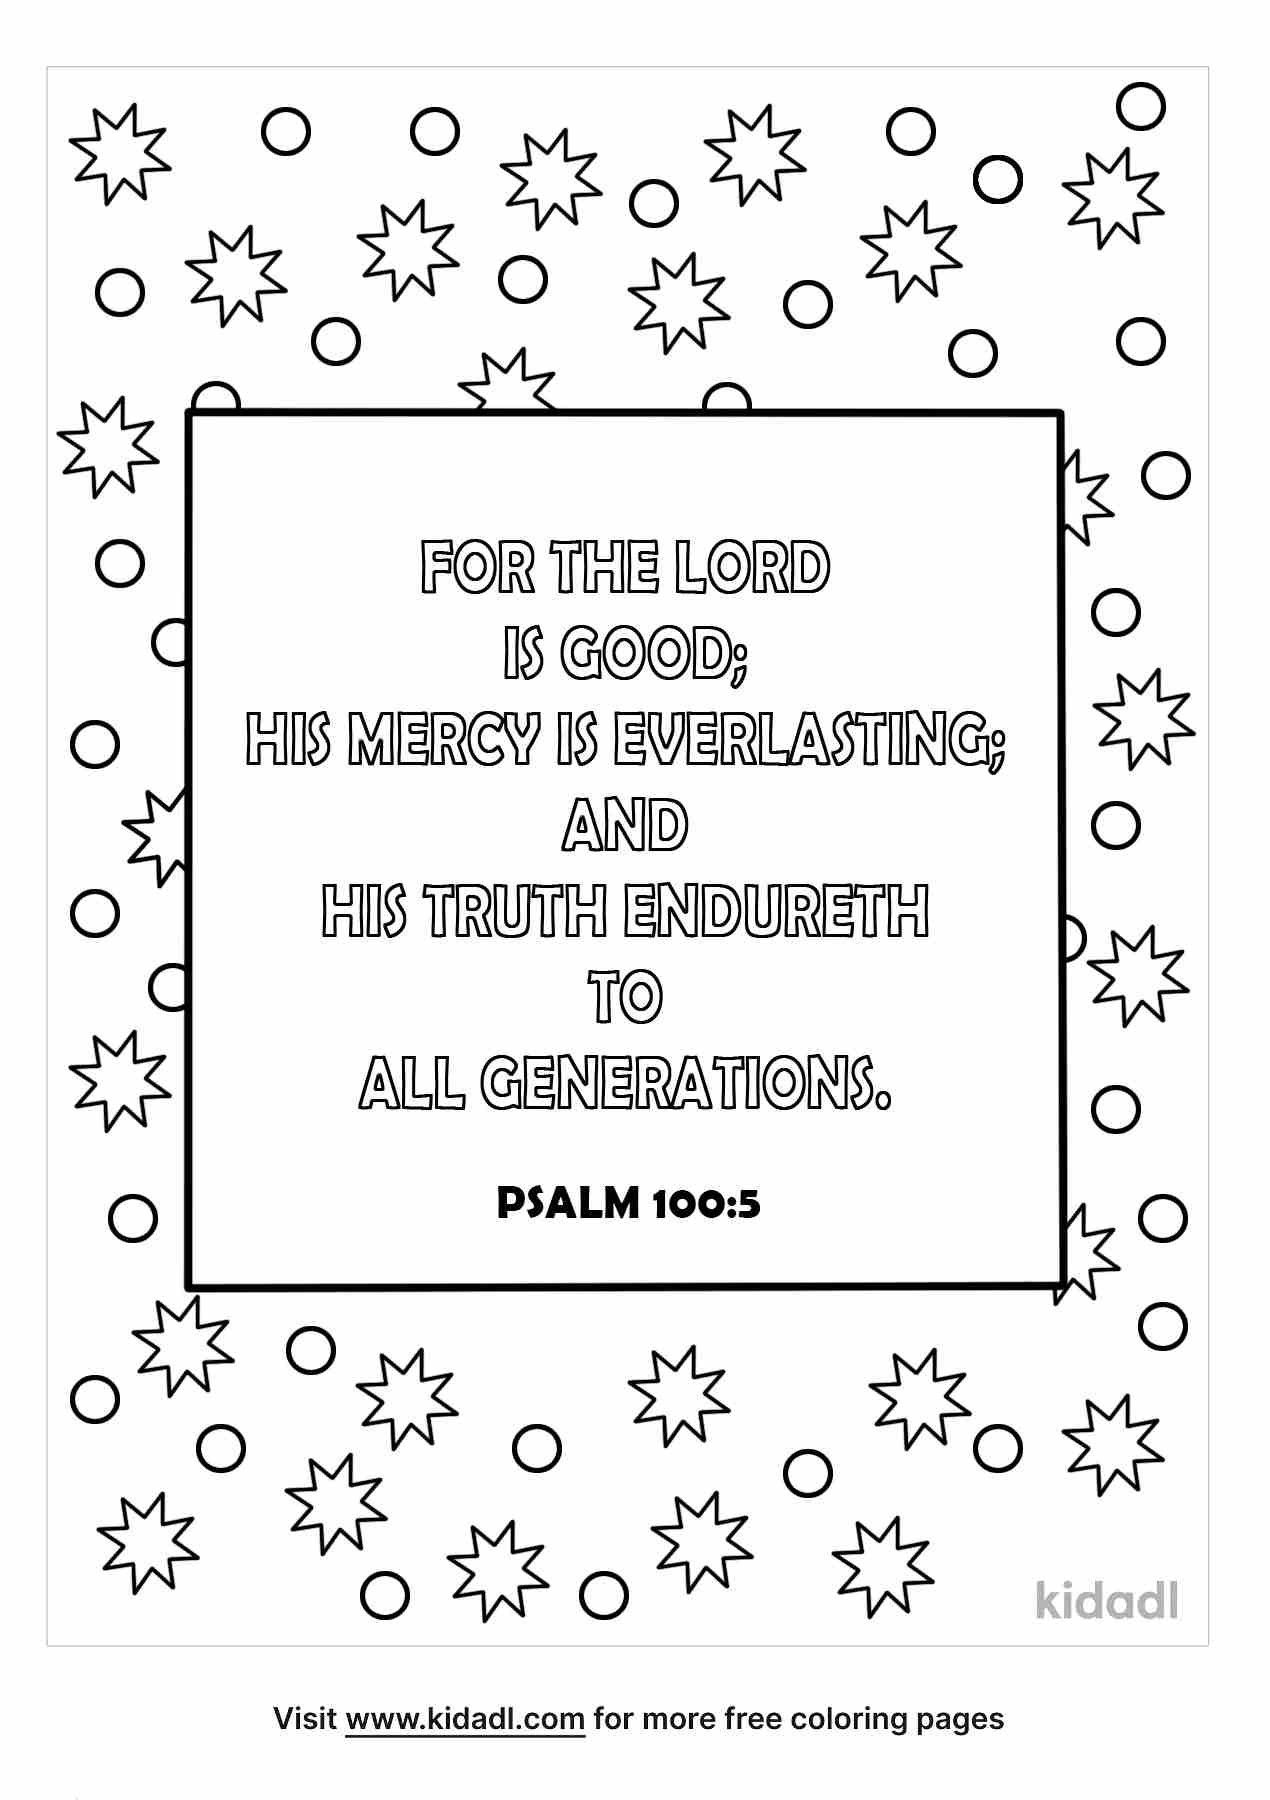 Free printable coloring page for Psalm 100:5.